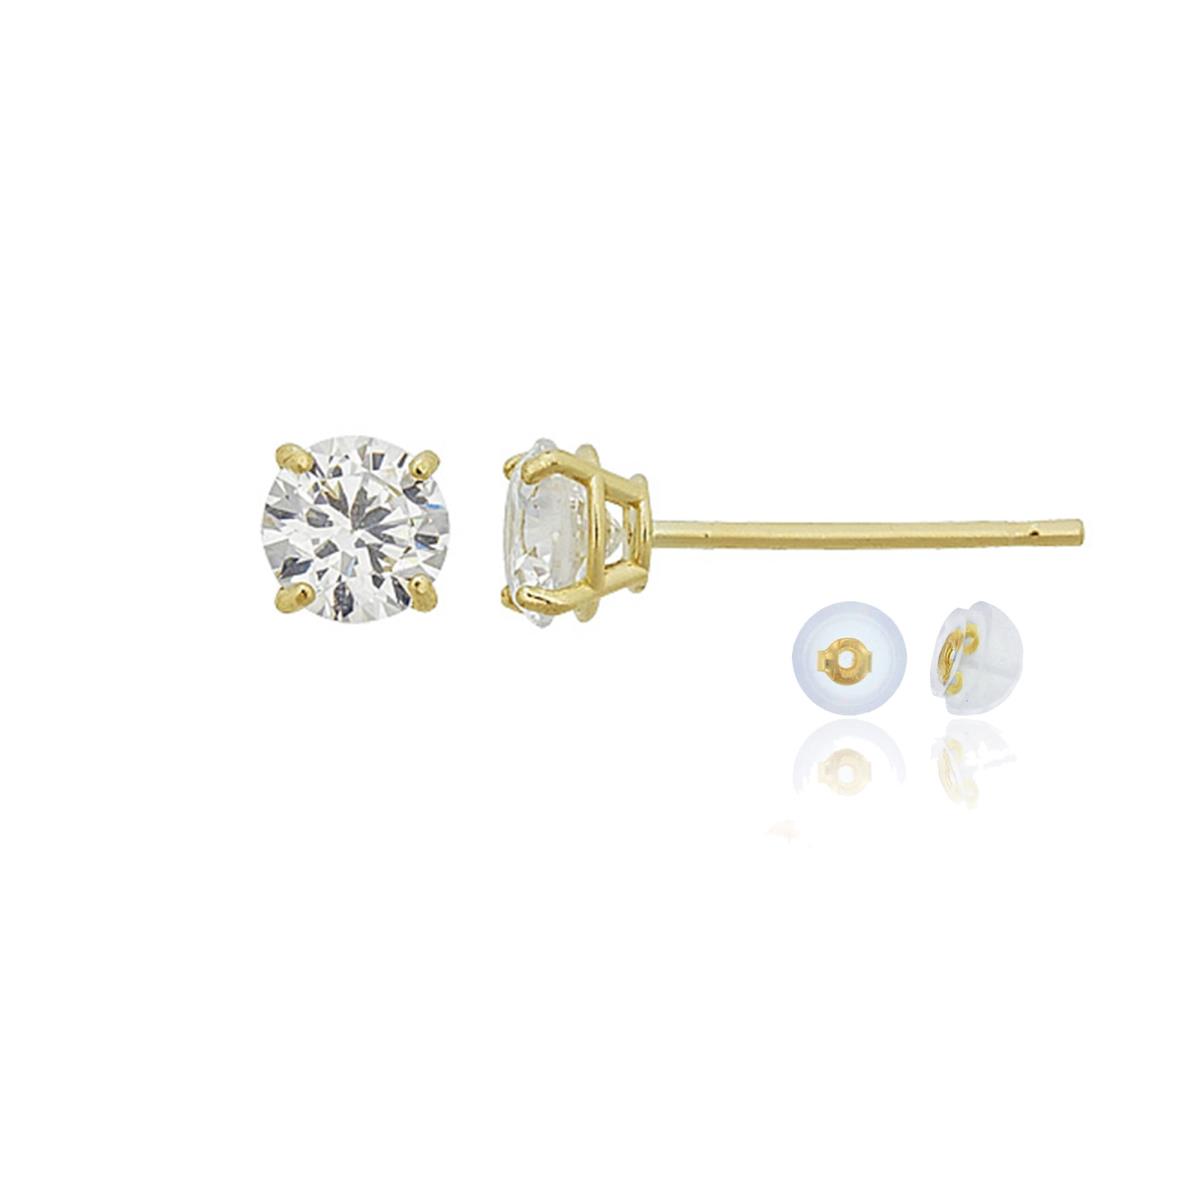 10K Yellow Gold 6mm Rd White Swarovski Zirconia 4-Prong Cast Basket Solitaire Earring & Silicone Bubble Back